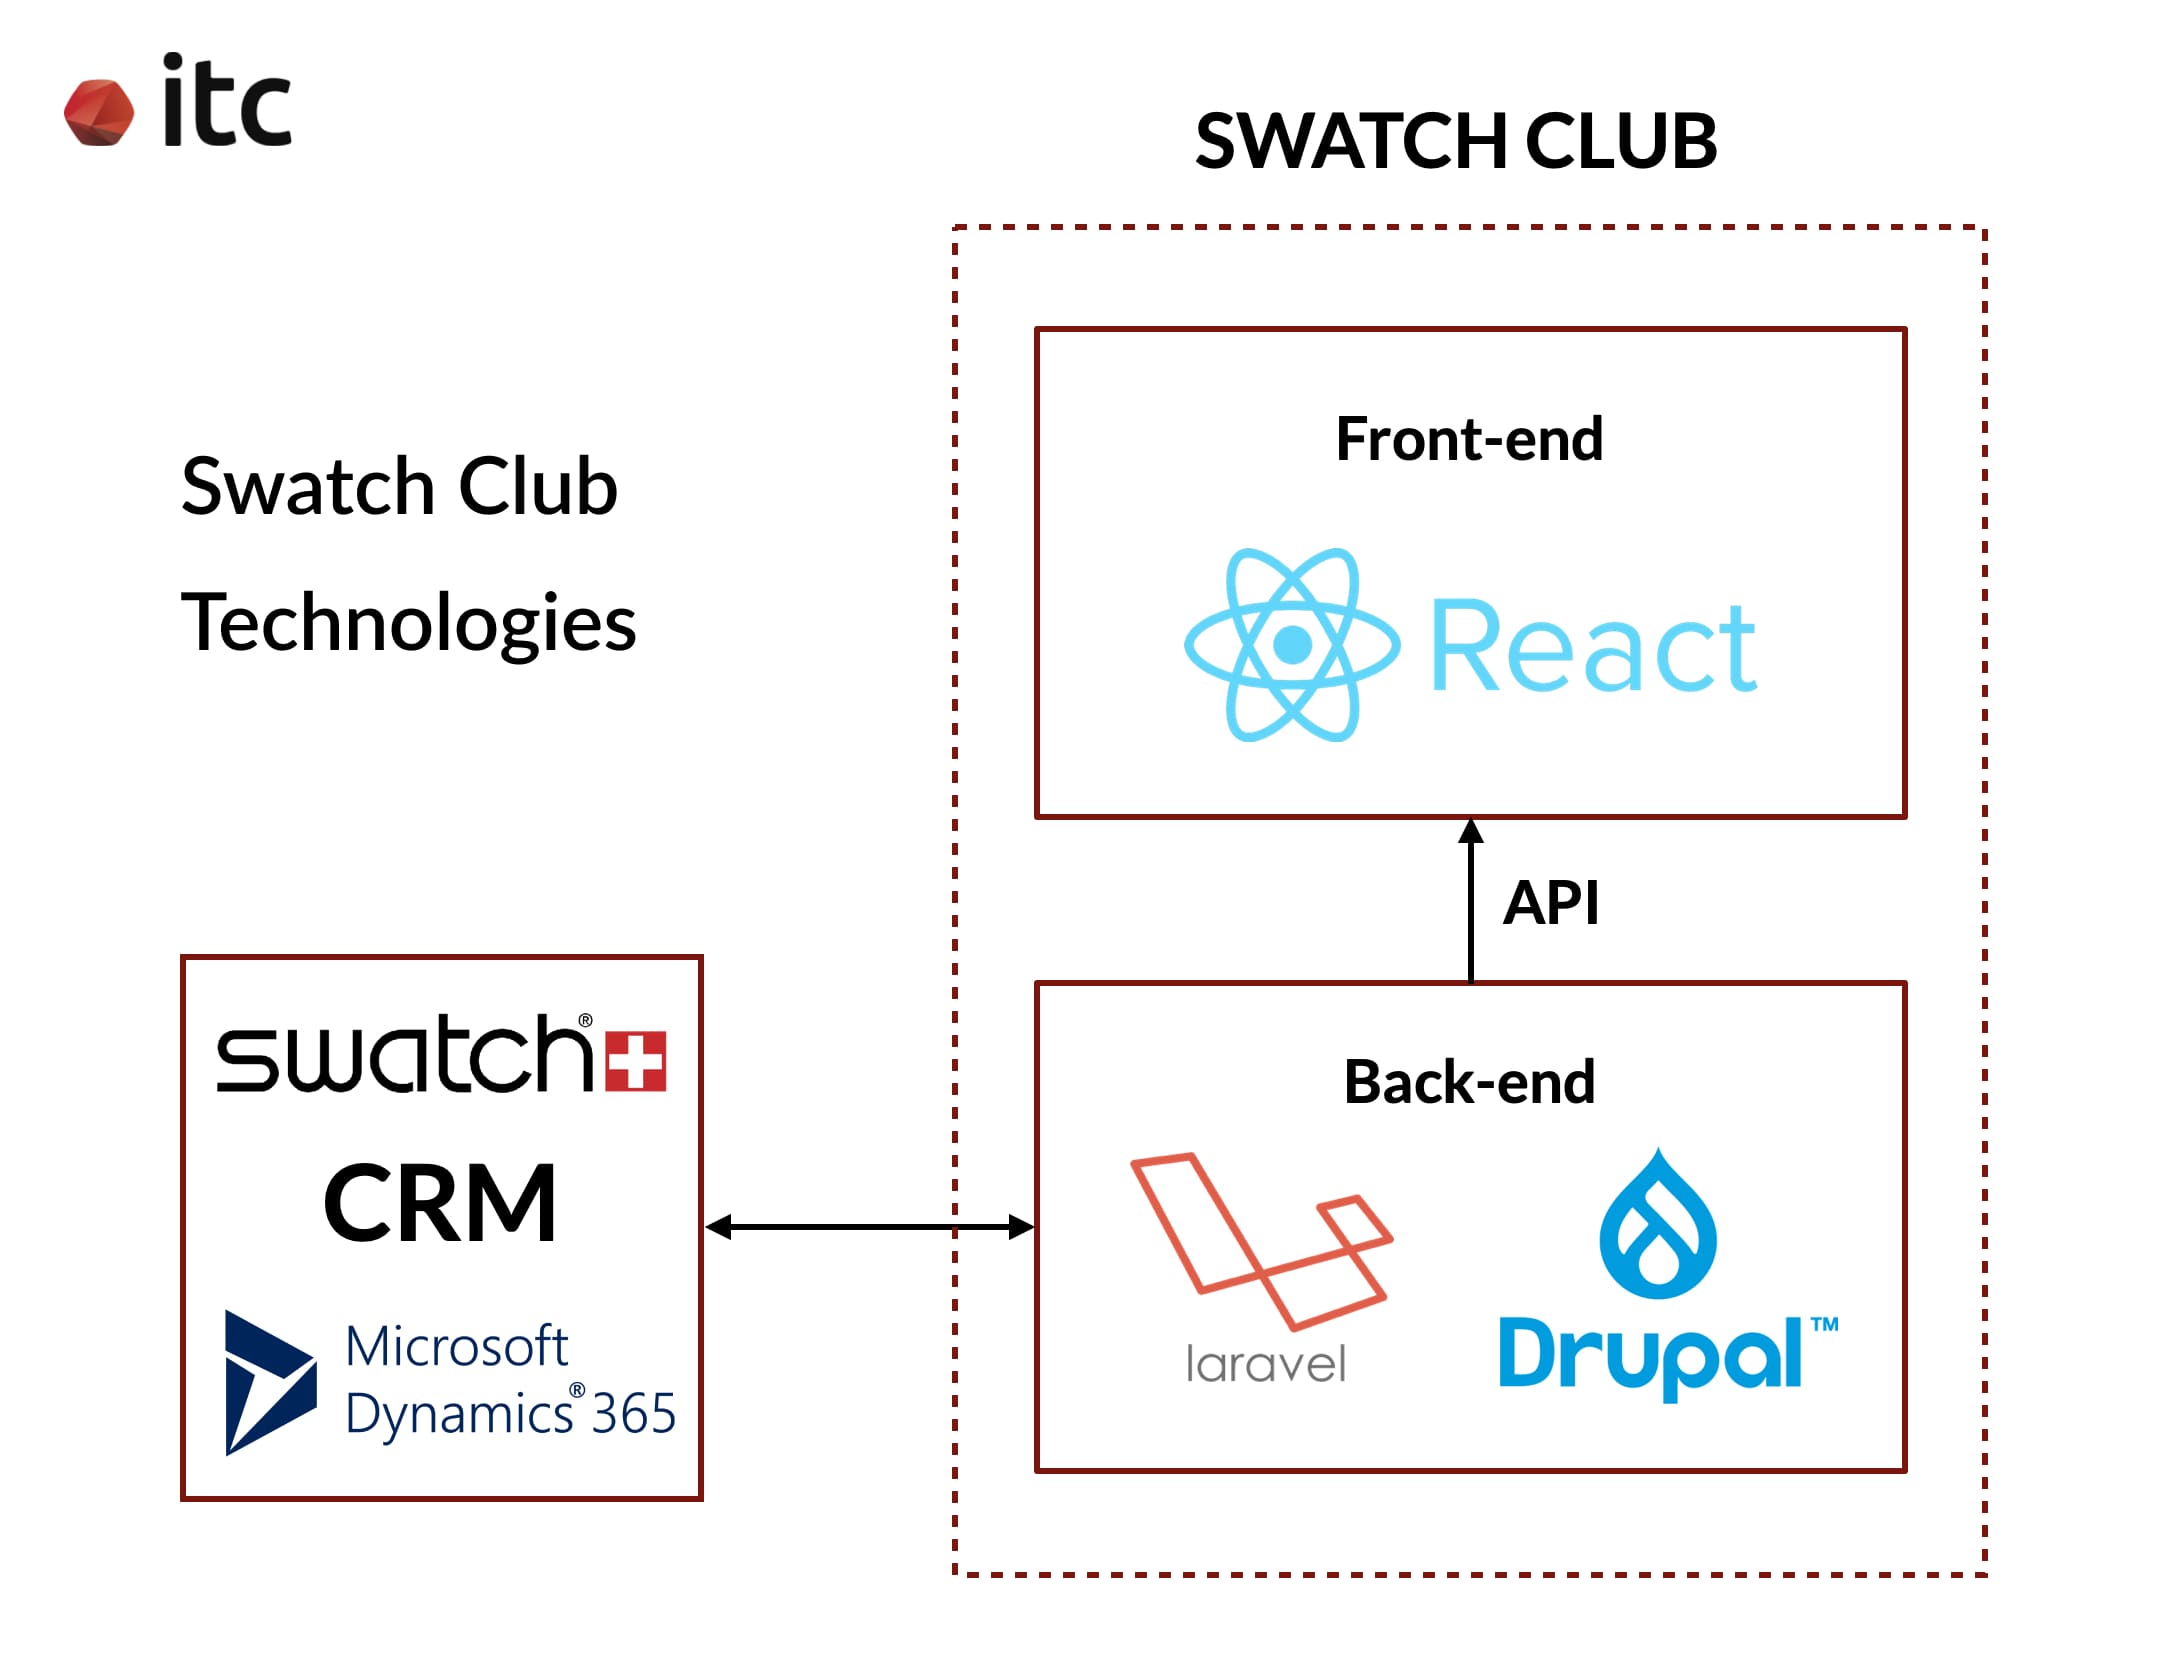 A chart illustrating the technologies ITC used to build the loyalty program for Swatch